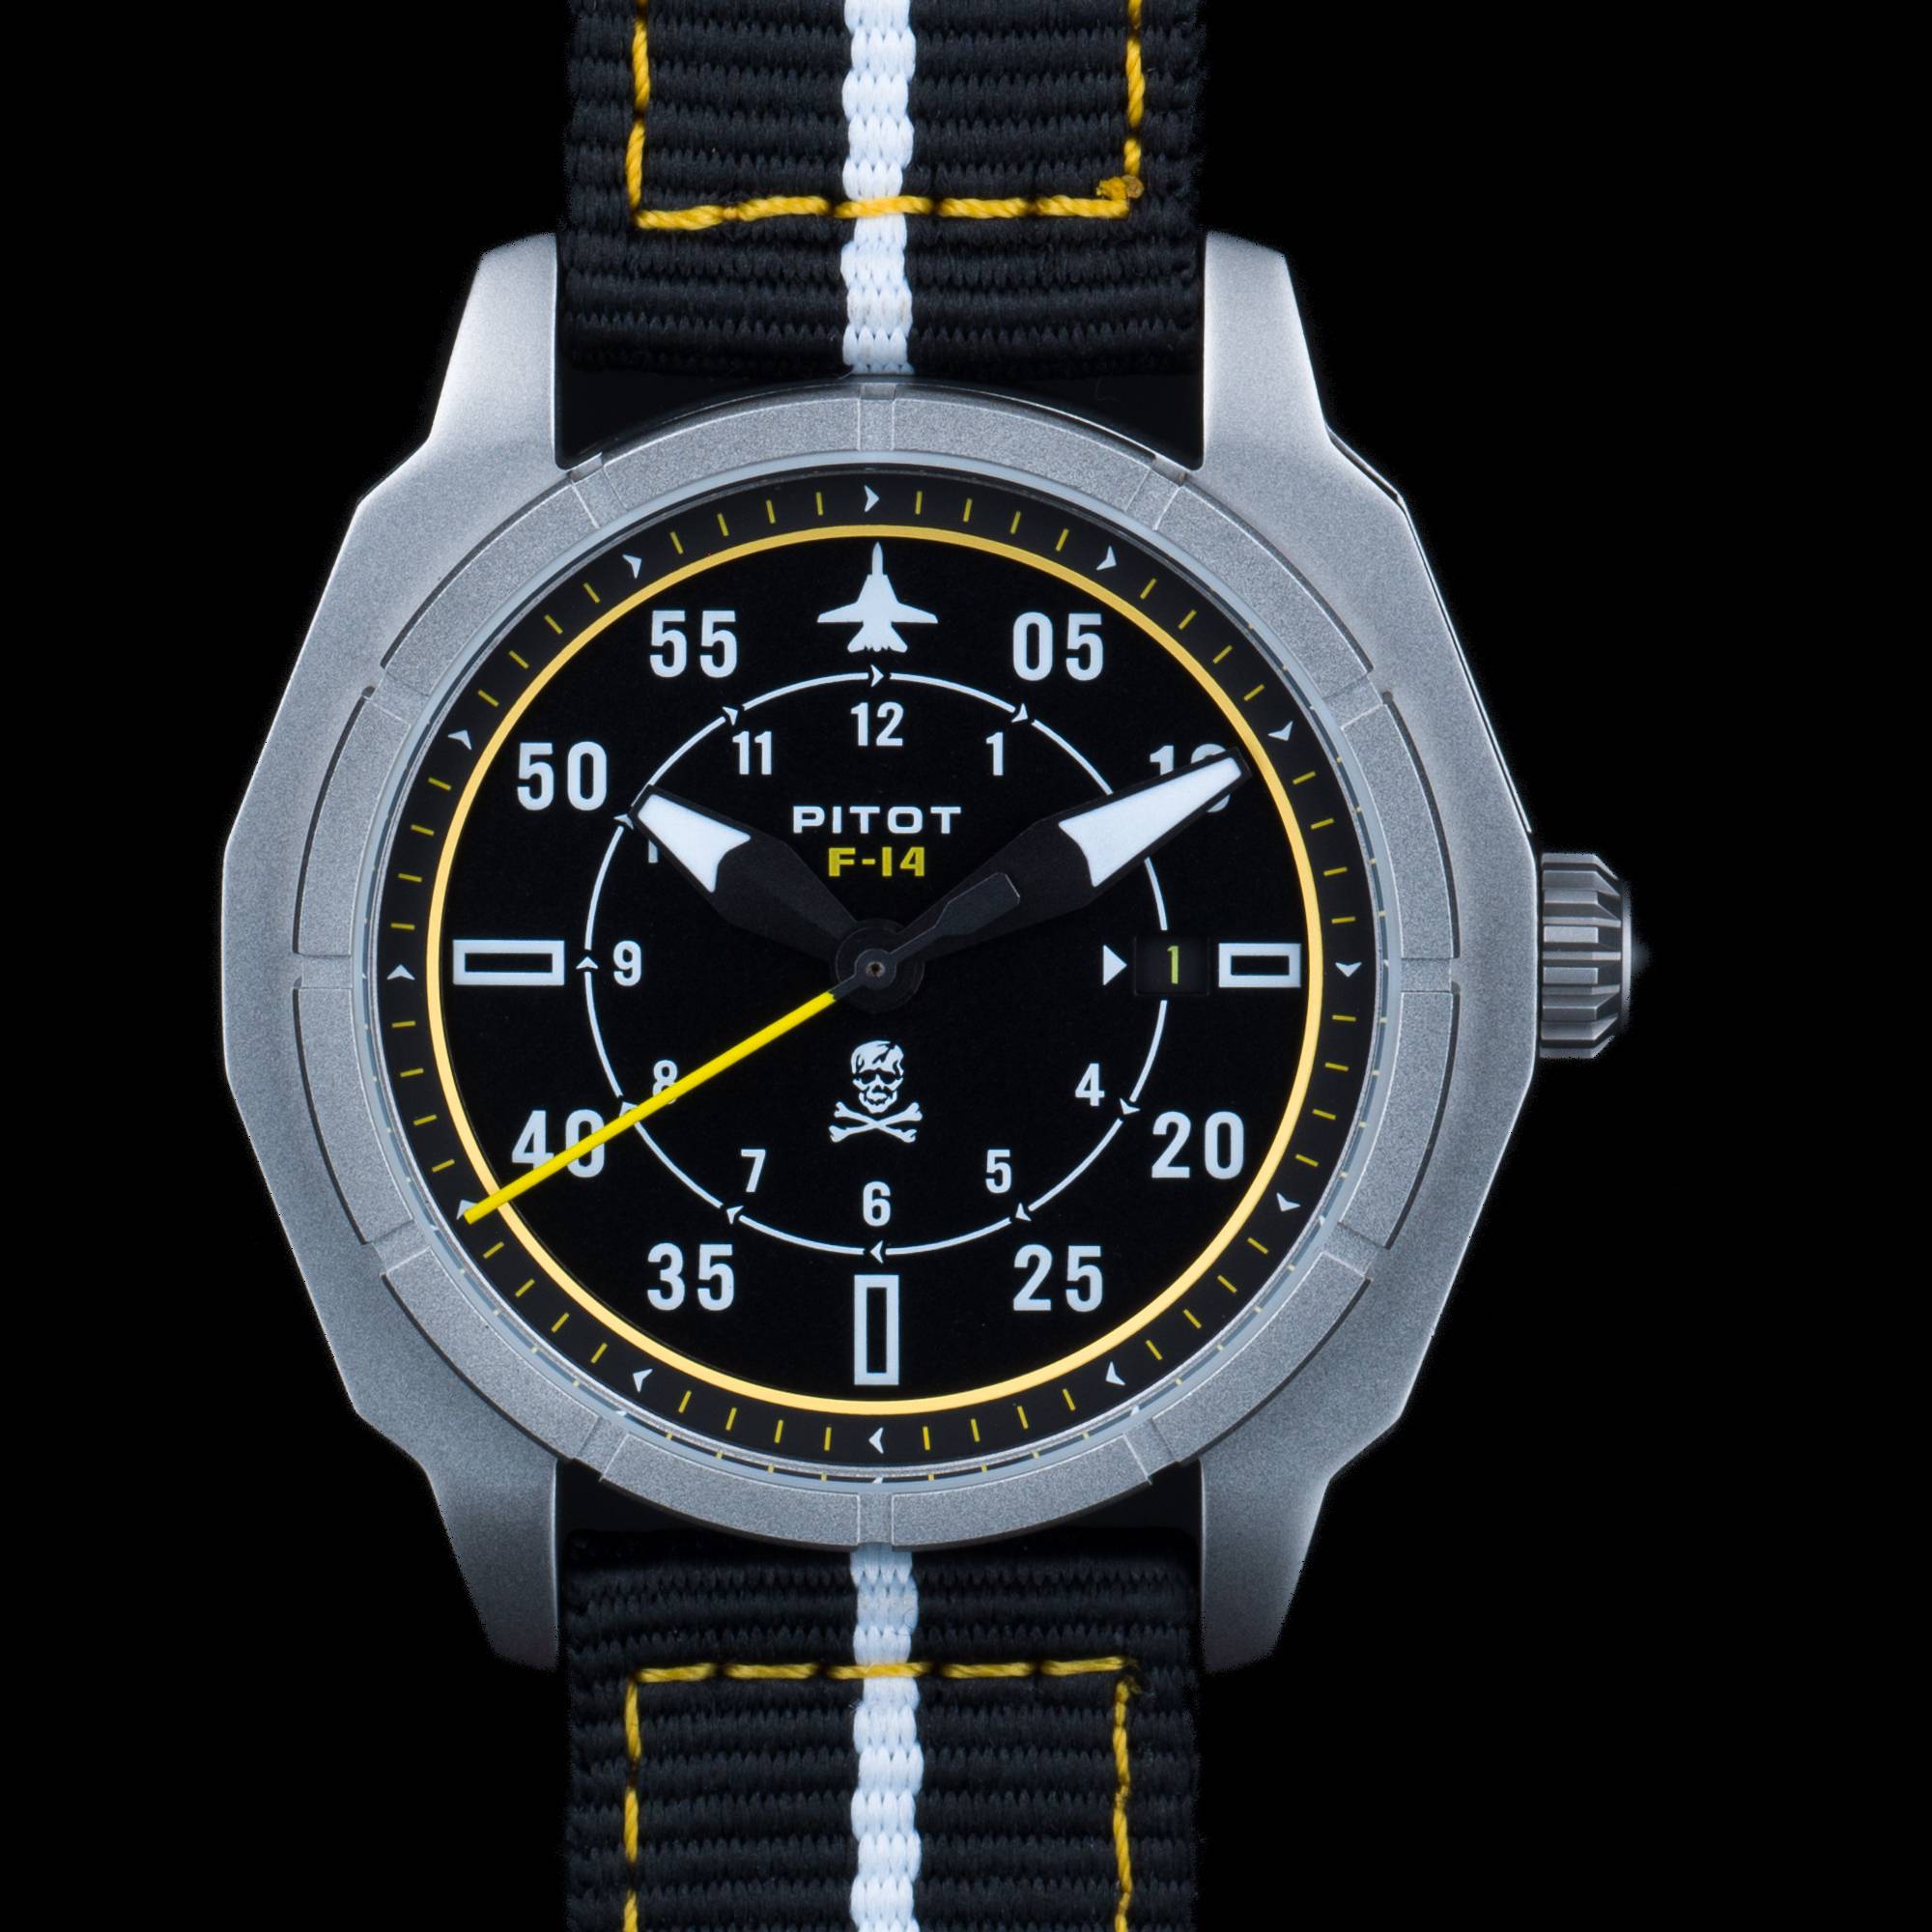 F-14 watches in stock May 1, 2021